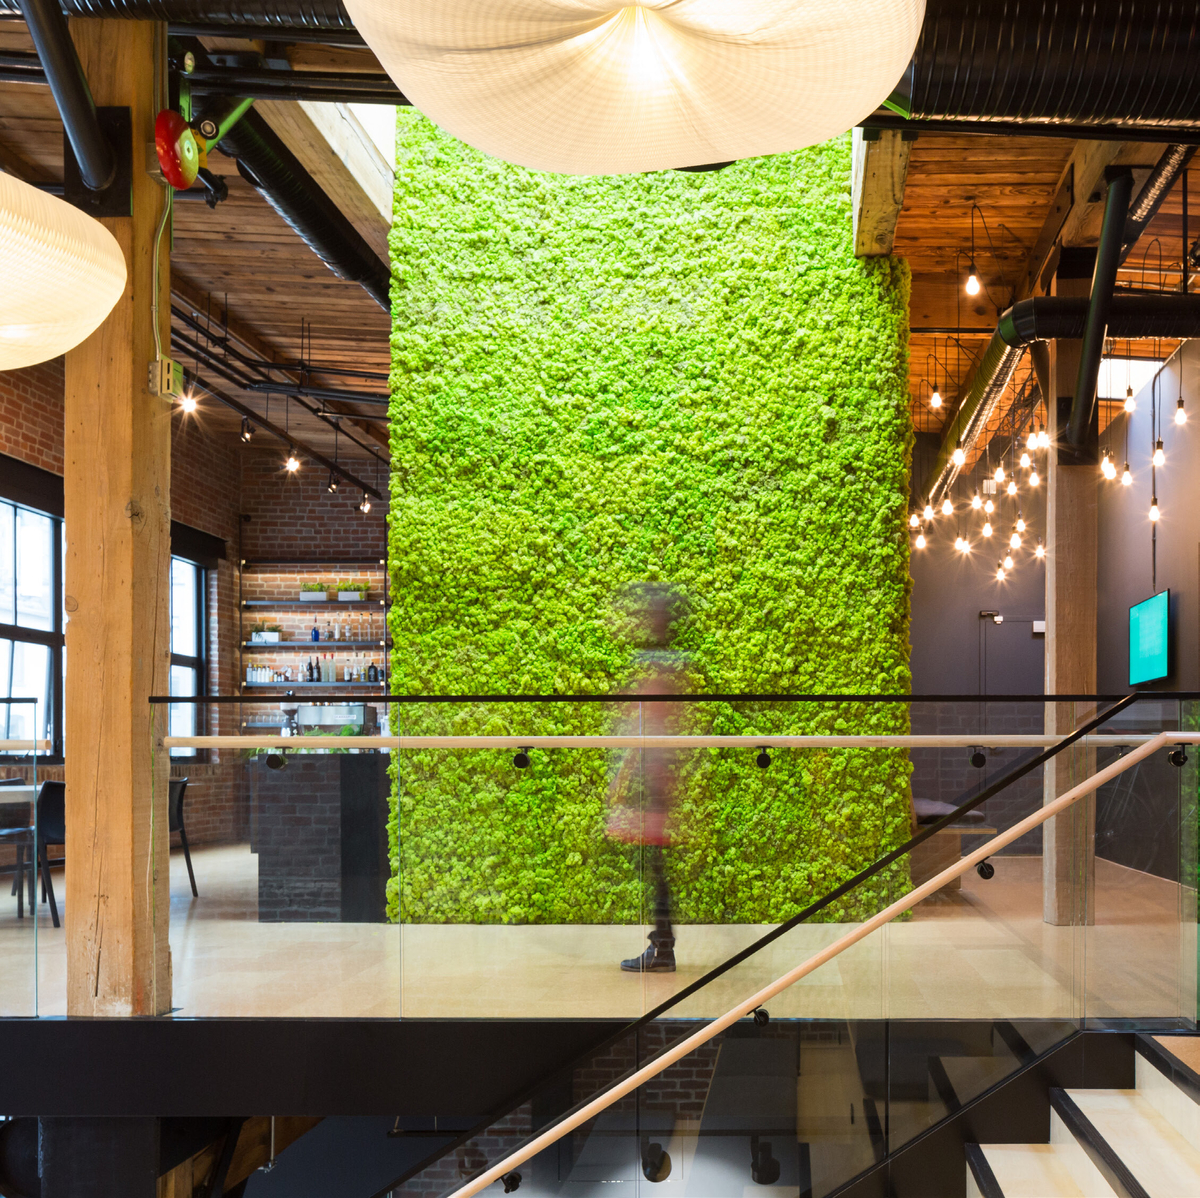 Interior daytime view of Slack Headquarters, showing century-old timber post-and-beam construction with massive timber beams and columns along with modern millwork and trim. Central to image is a natural green wall, made of lichen